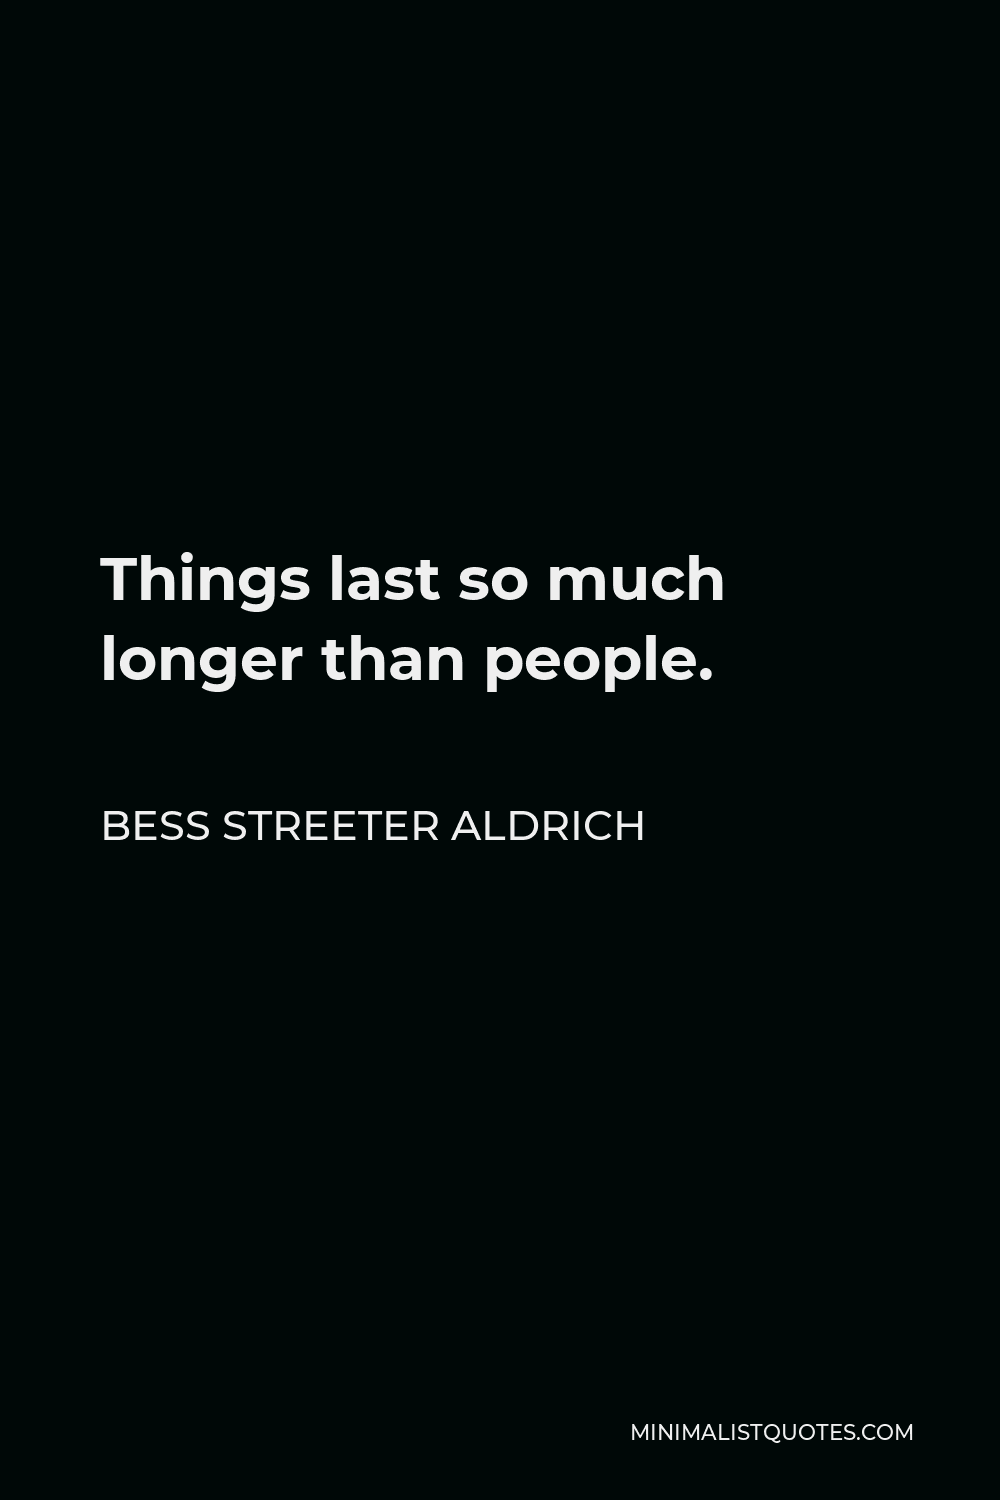 Bess Streeter Aldrich Quote - Things last so much longer than people.